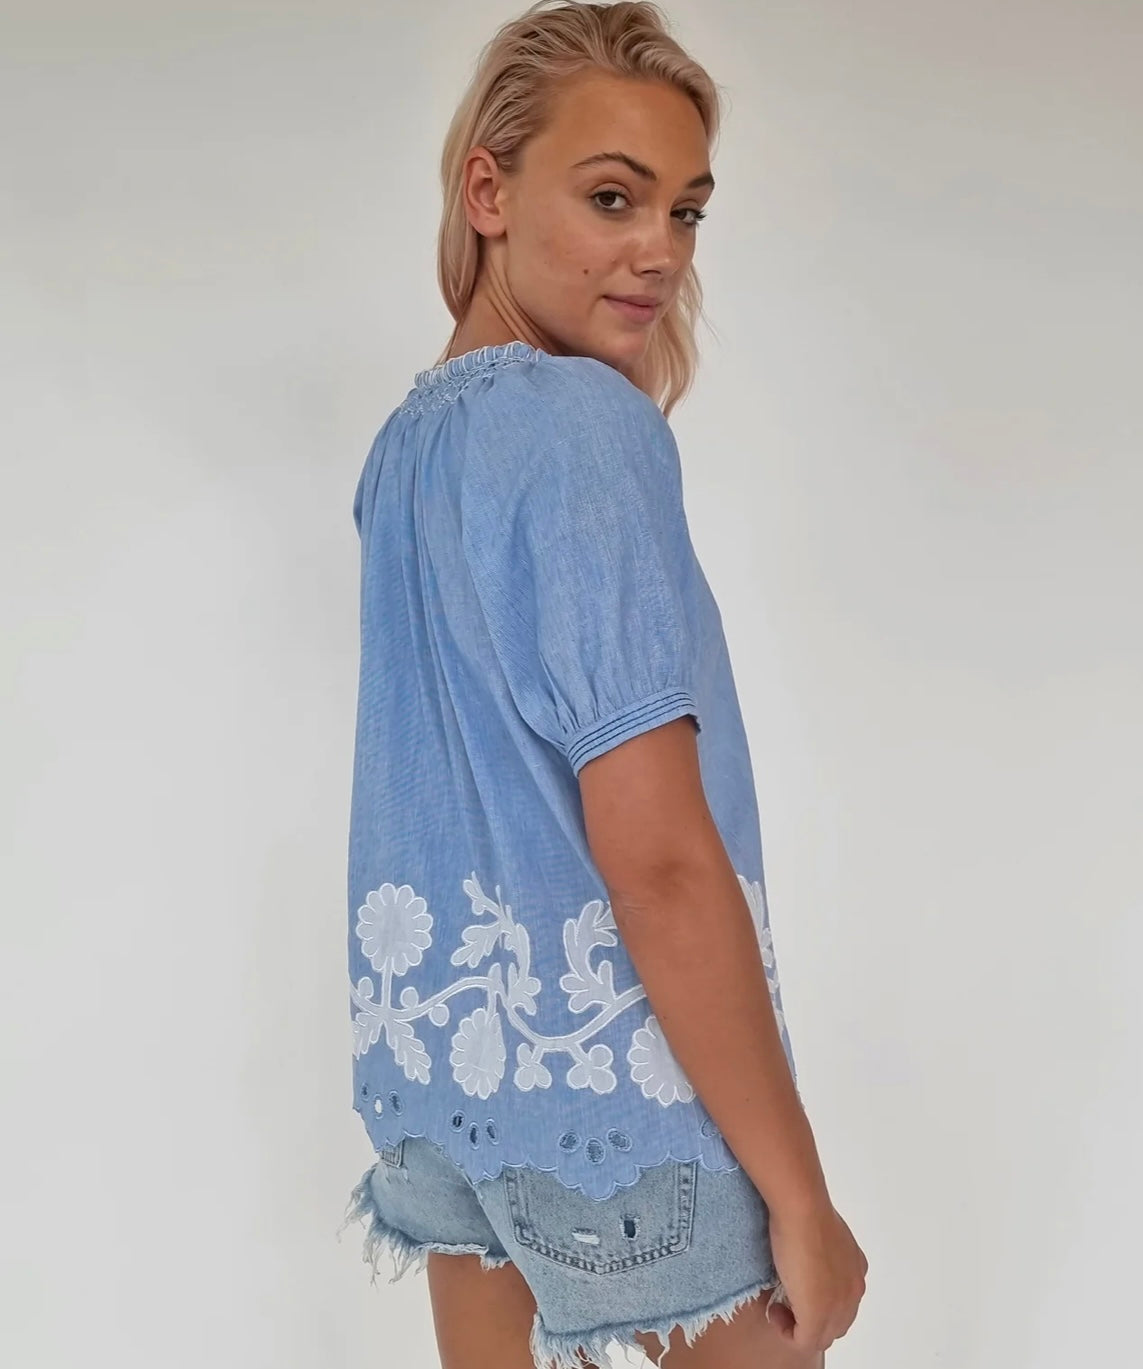 rose and rose Kelly Top -Pale Blue/white